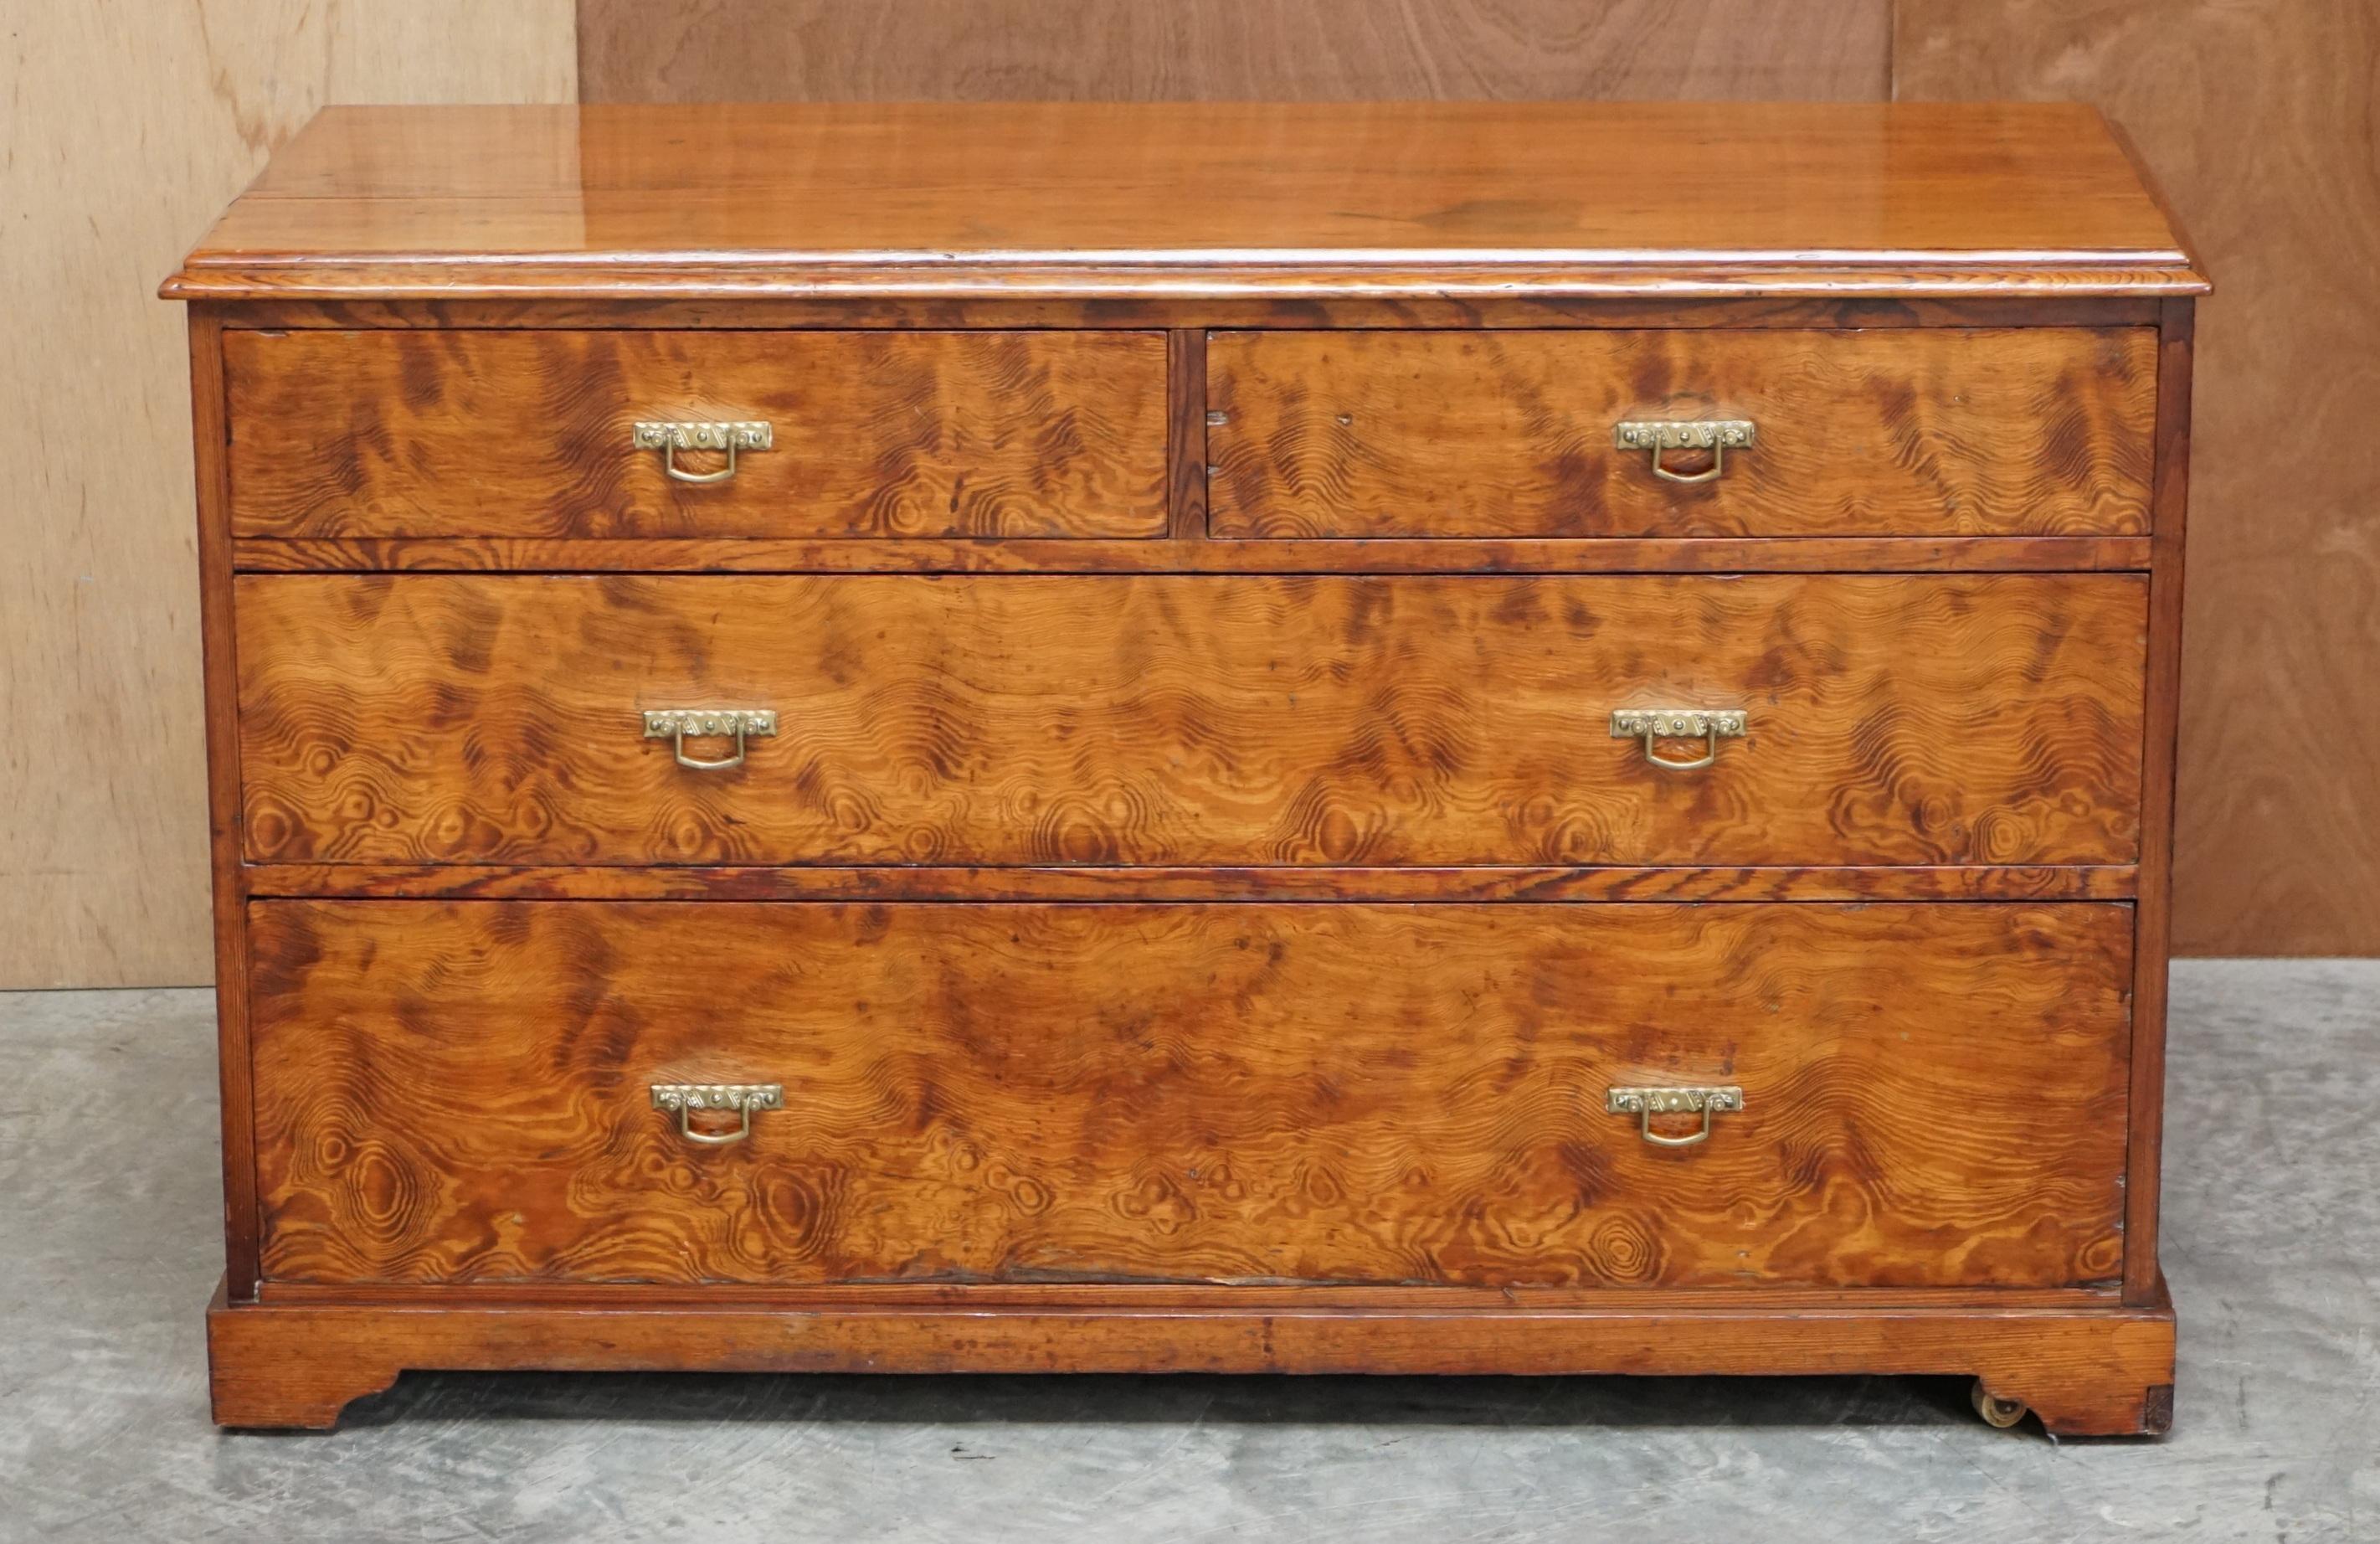 We are delighted to offer this absolutely stunning Victorian Pitch Pine low two over two chest of drawers with Victorian castors and stamped to the rear George Hudson

Please note the delivery fee listed is just a guide, it covers within the M25